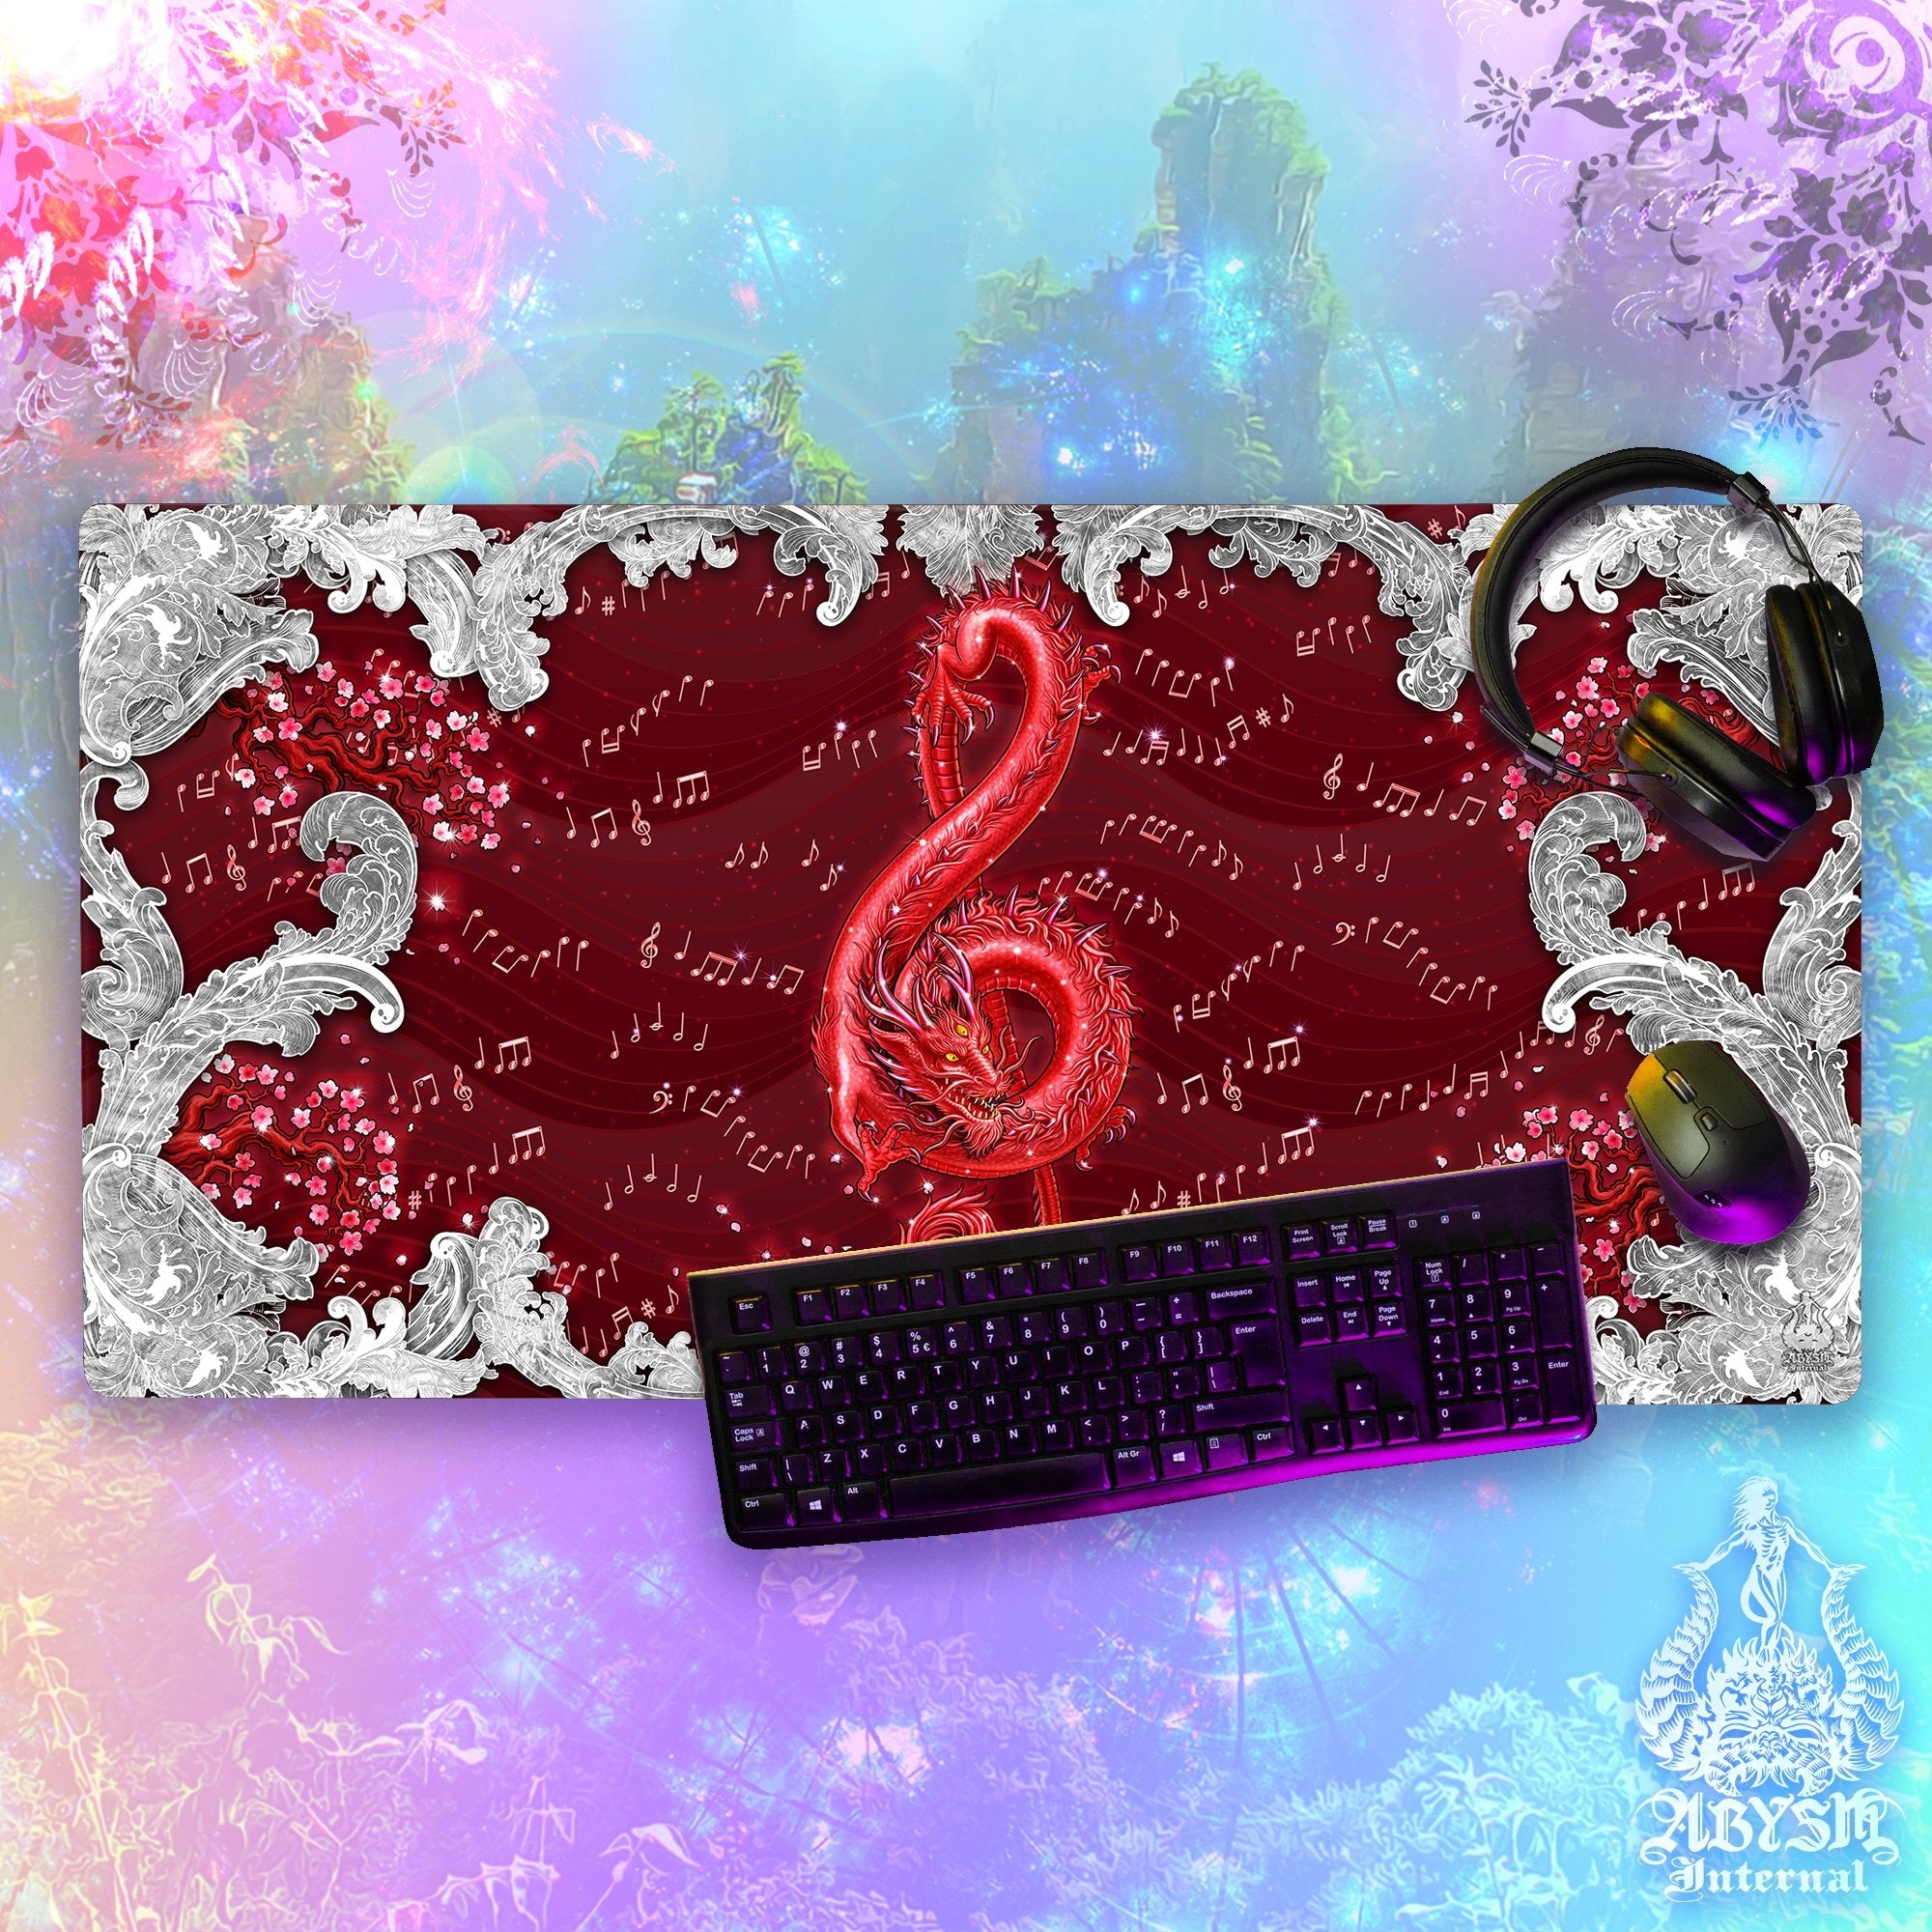 Dragon Workpad, Music Desk Mat, Asian Gaming Mouse Pad, Indie Gemstone Table Protector Cover, Treble Clef Art Print - 8 Color Options - Abysm Internal